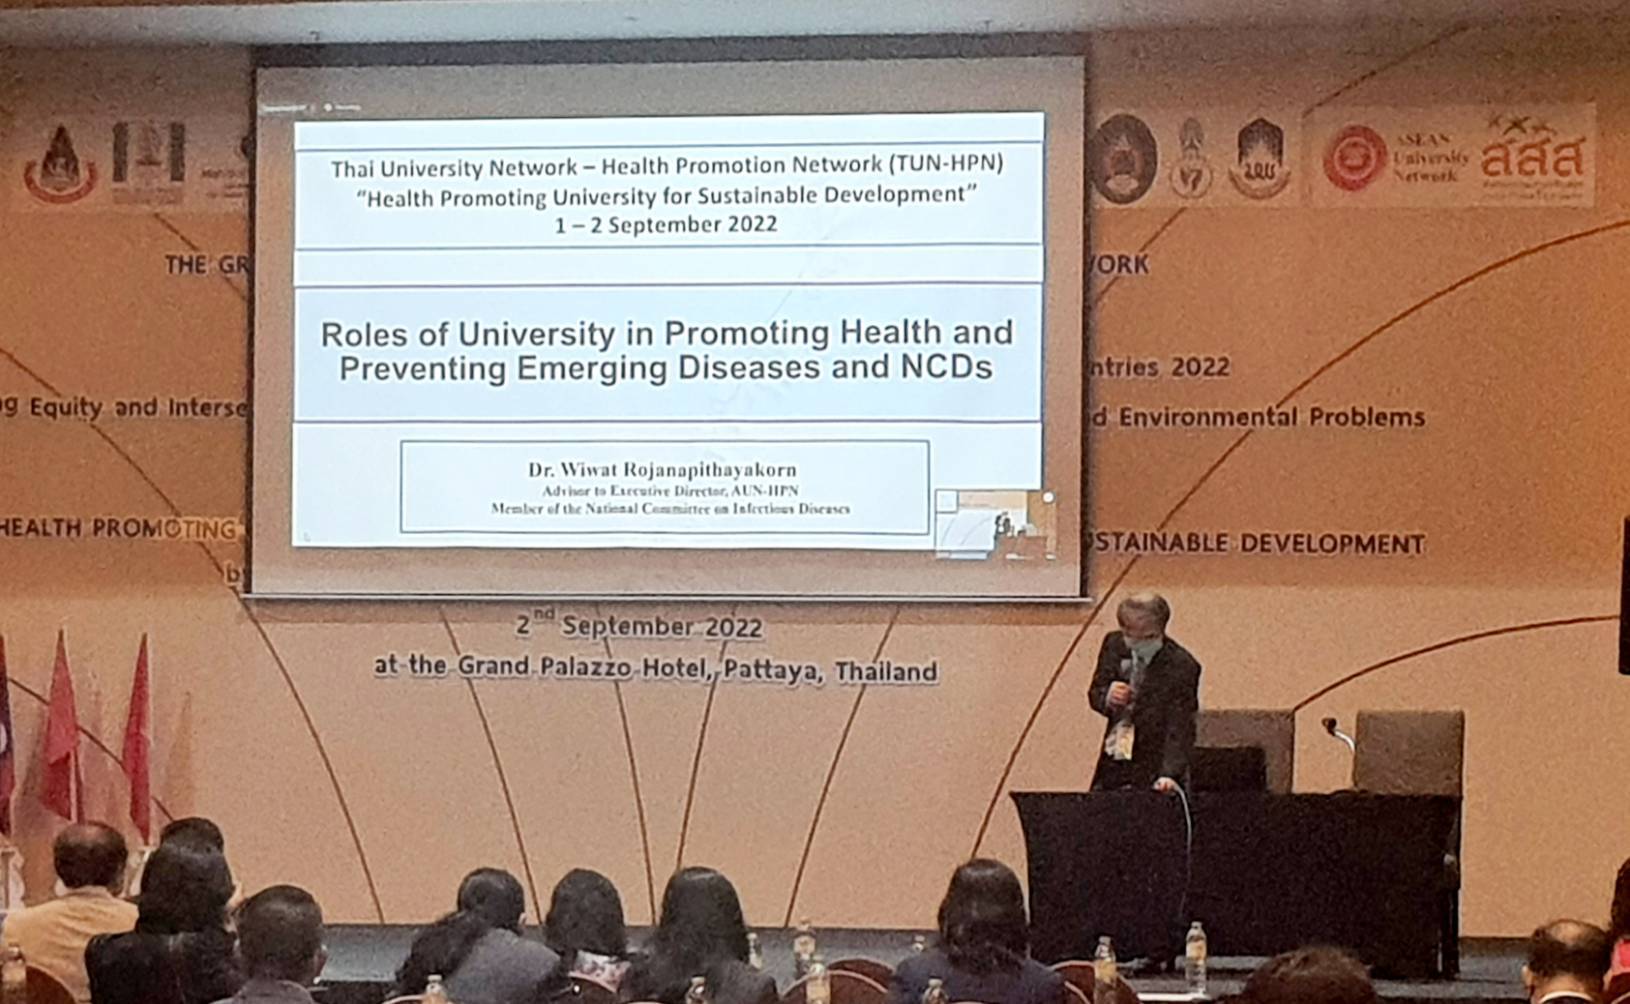 ThaiHealth and Thai University Network for Health Promotion join Thailand’s first congress on “Health Promoting University for Sustainable Development”  thaihealth